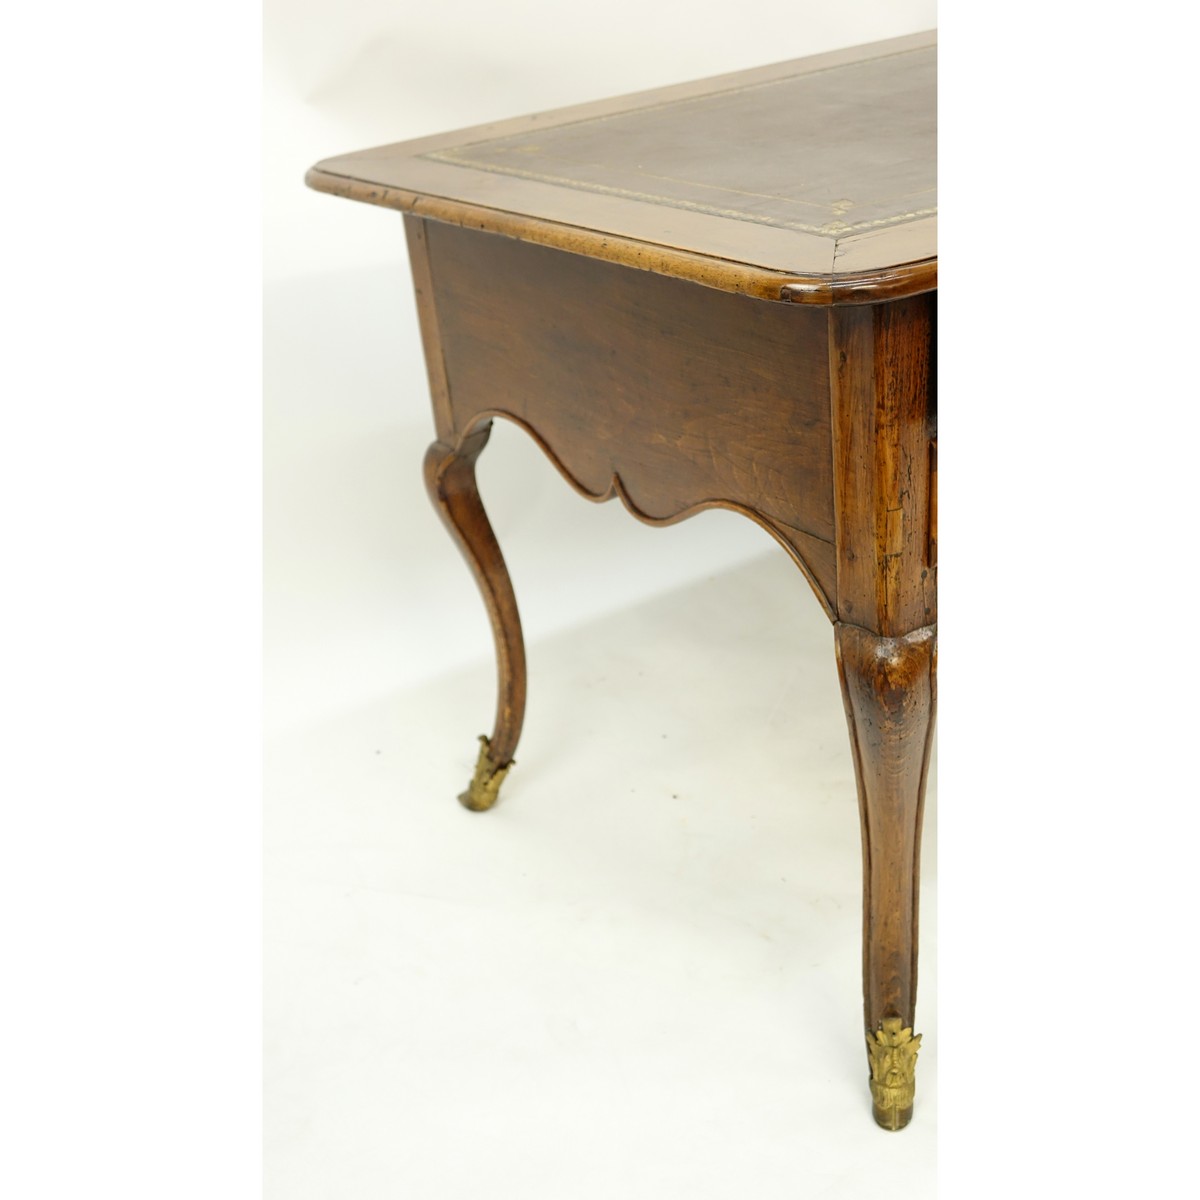 Large 19th Century French Walnut Writing Desk with Tooled Leather Top, Gilt Bronze Mounts. Large center drawer flanked by four fitted drawers, stands on tapering cabriole legs with hooves as feet.